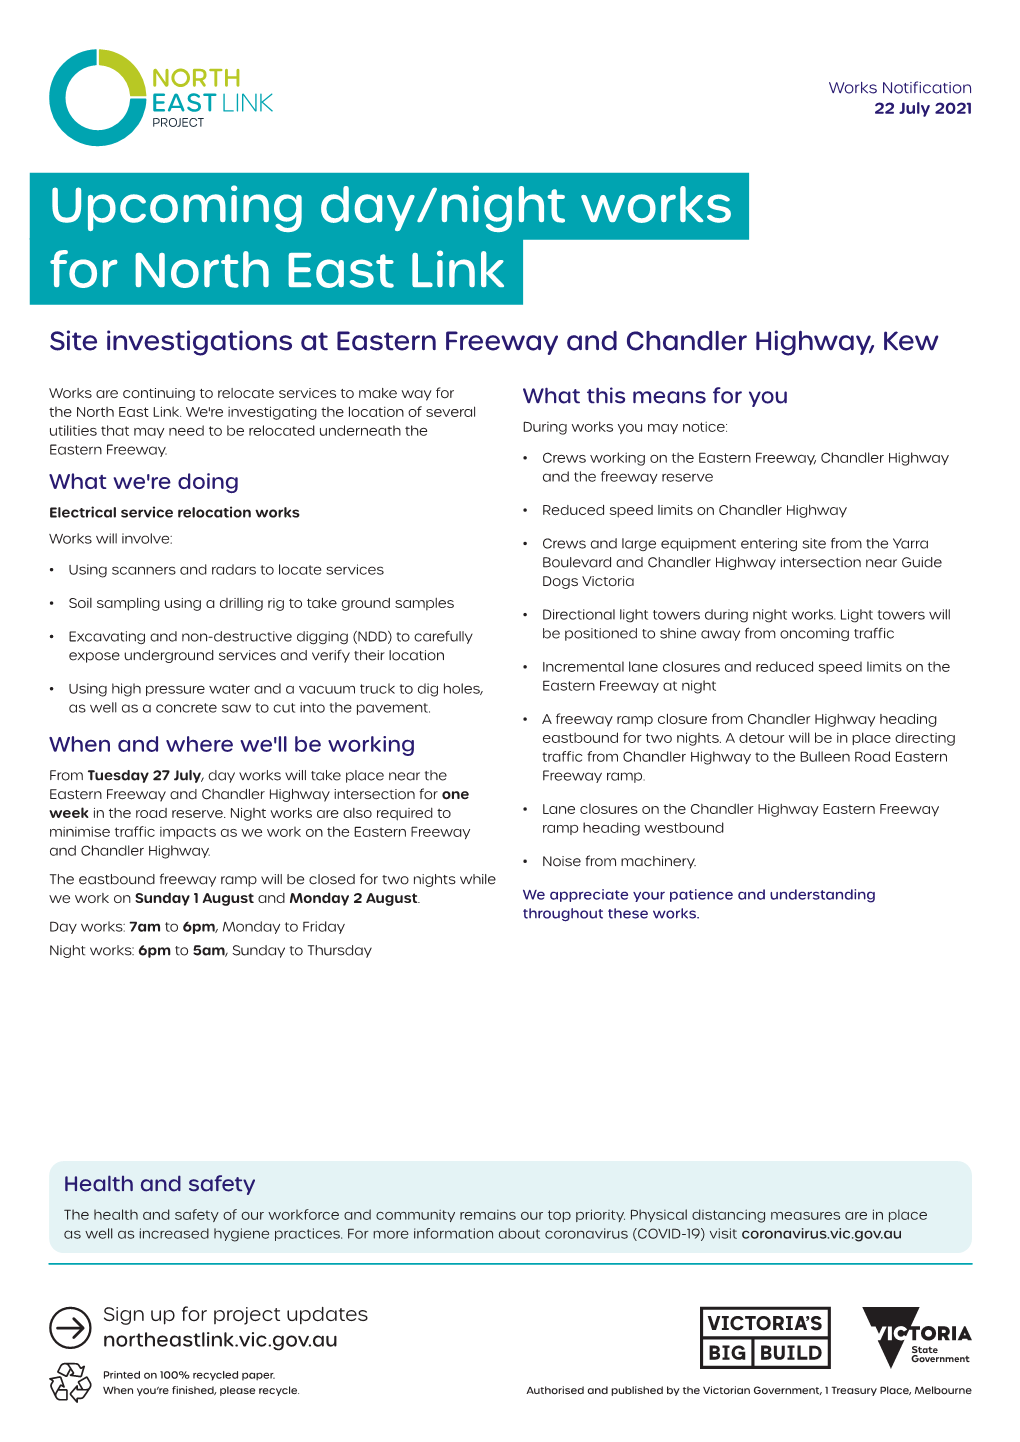 Upcoming Day/Night Works for North East Link